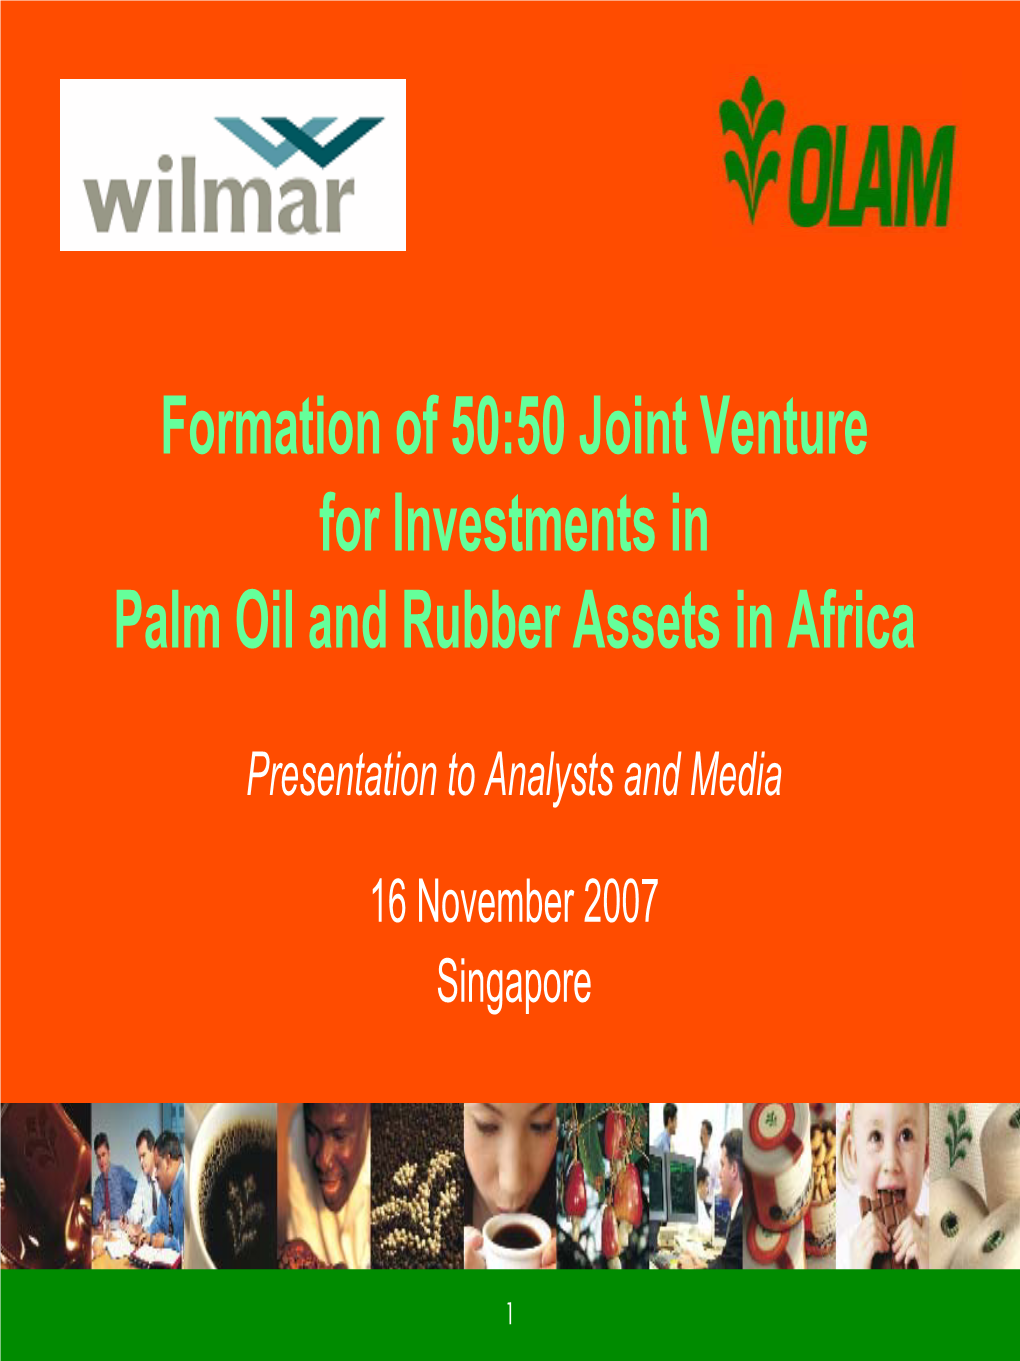 Formation of 50:50 Joint Venture for Investments in Palm Oil and Rubber Assets in Africa